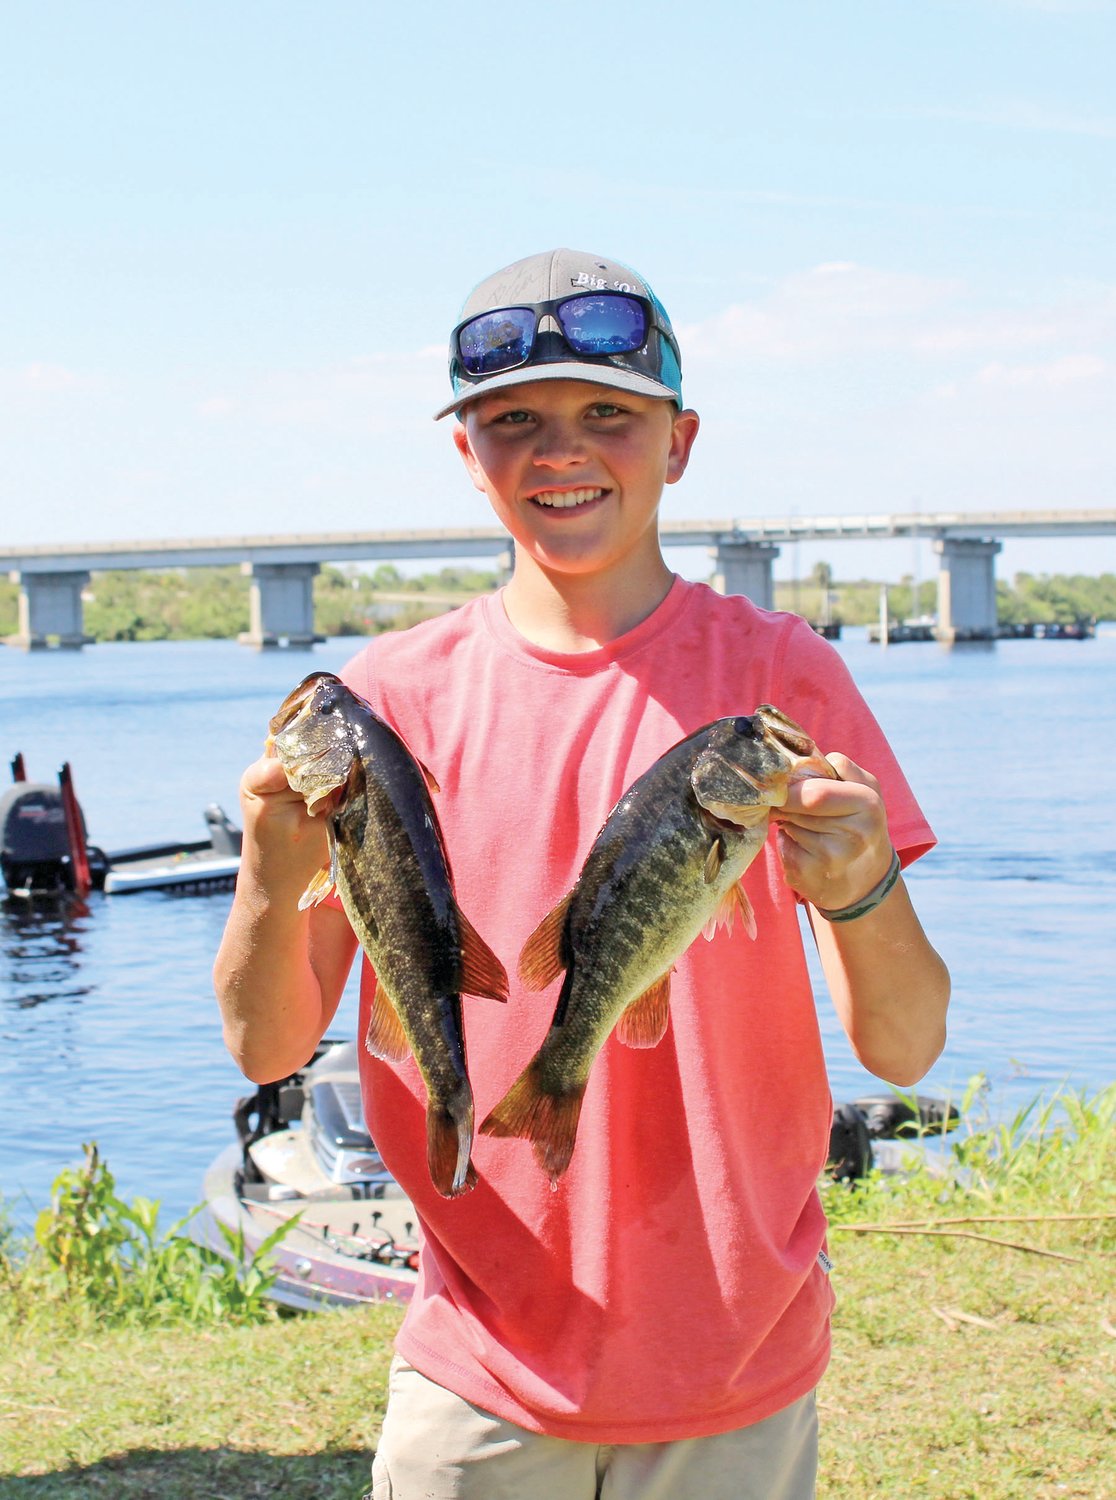 Second place winner in the 9-13 age group was  Raylon Ferrell with 5.43 pounds